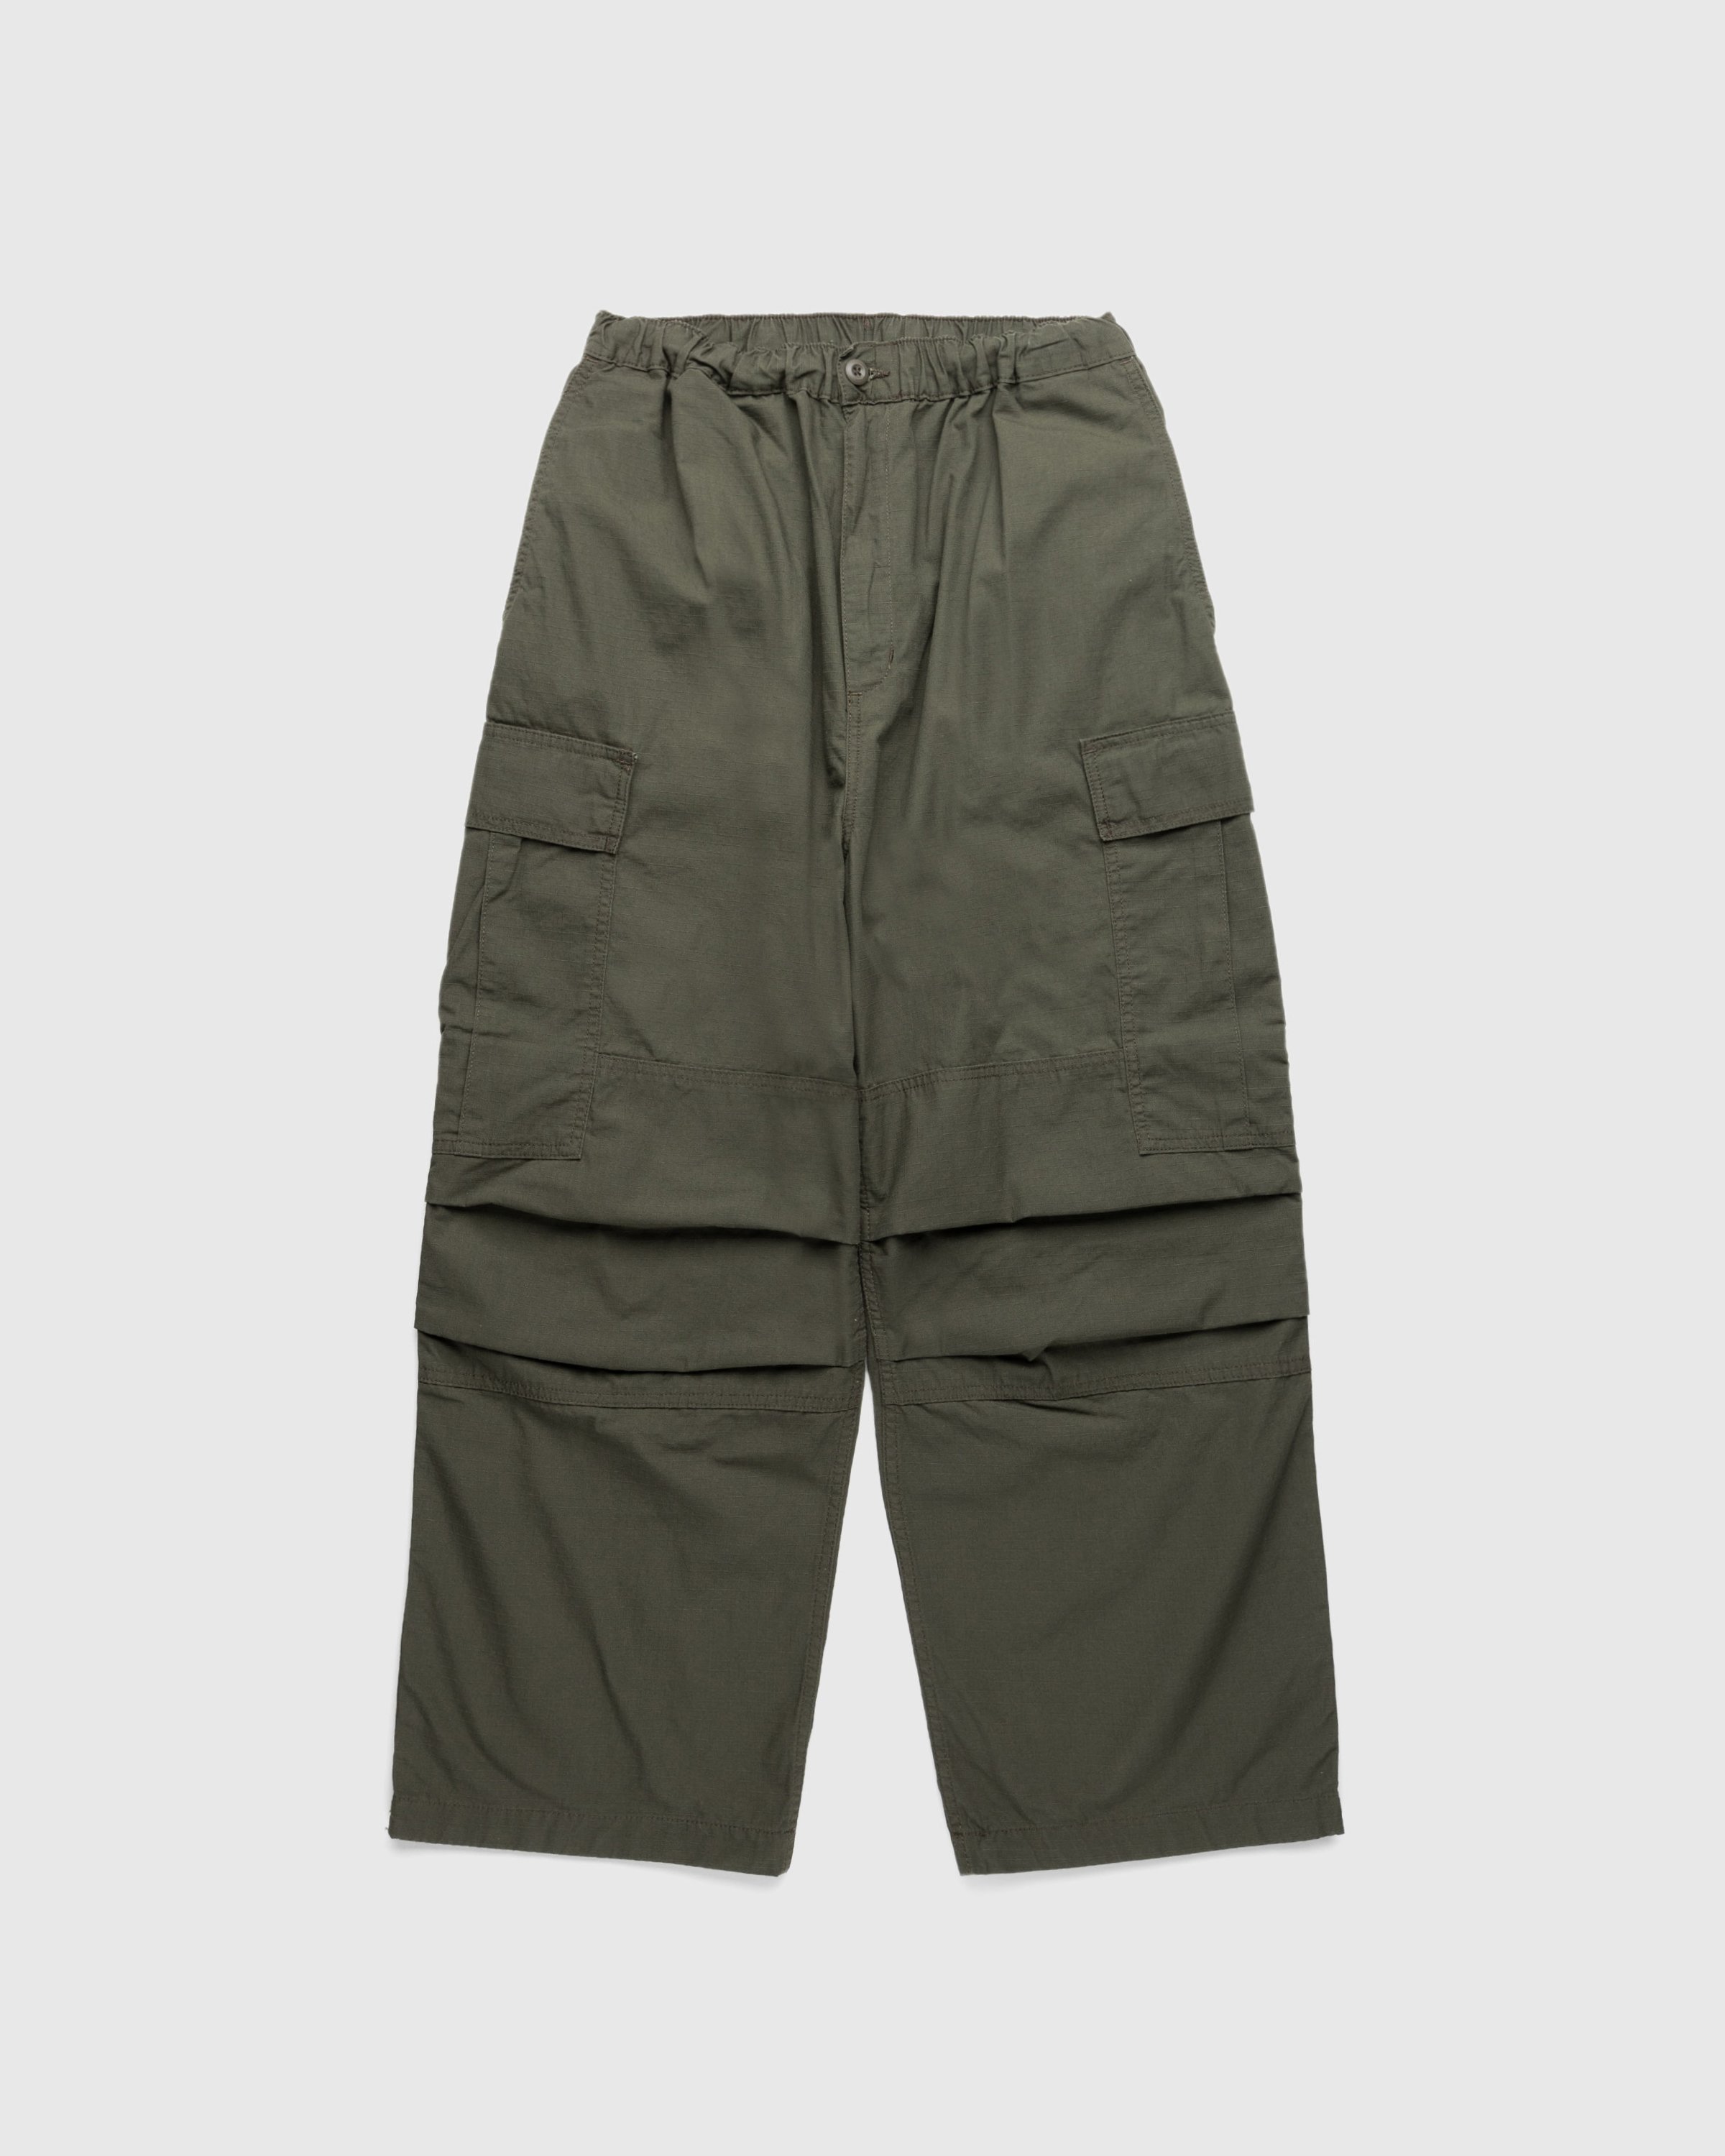 Carhartt WIP - Jet Cargo Pant Cypress/Rinsed - Clothing - Green - Image 1